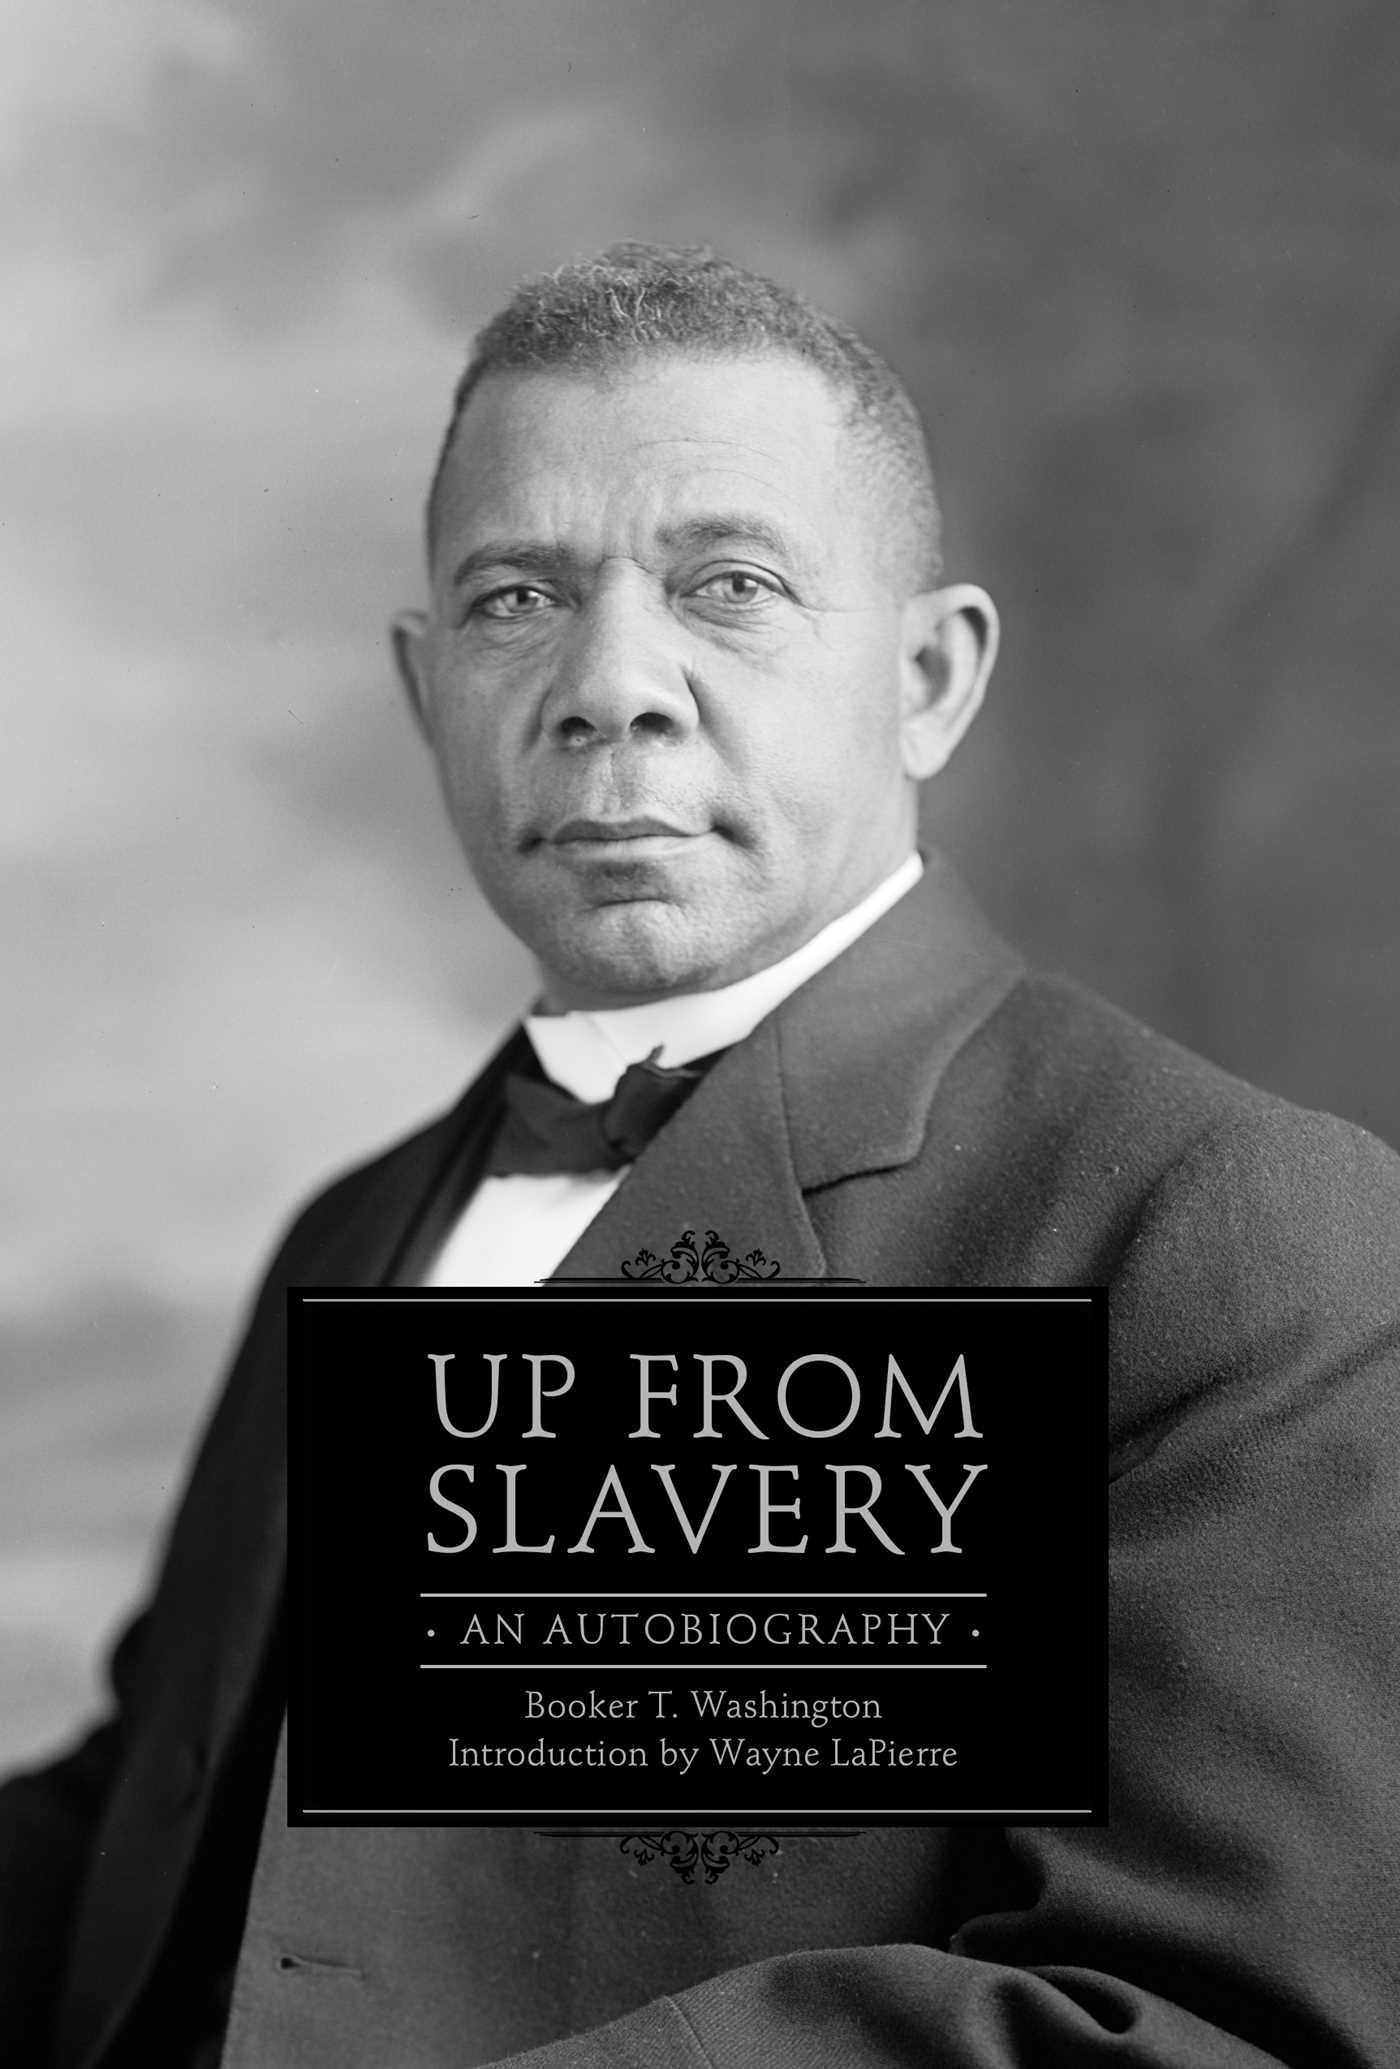 Booker T. Washington's Autobiography: Up from Slavery